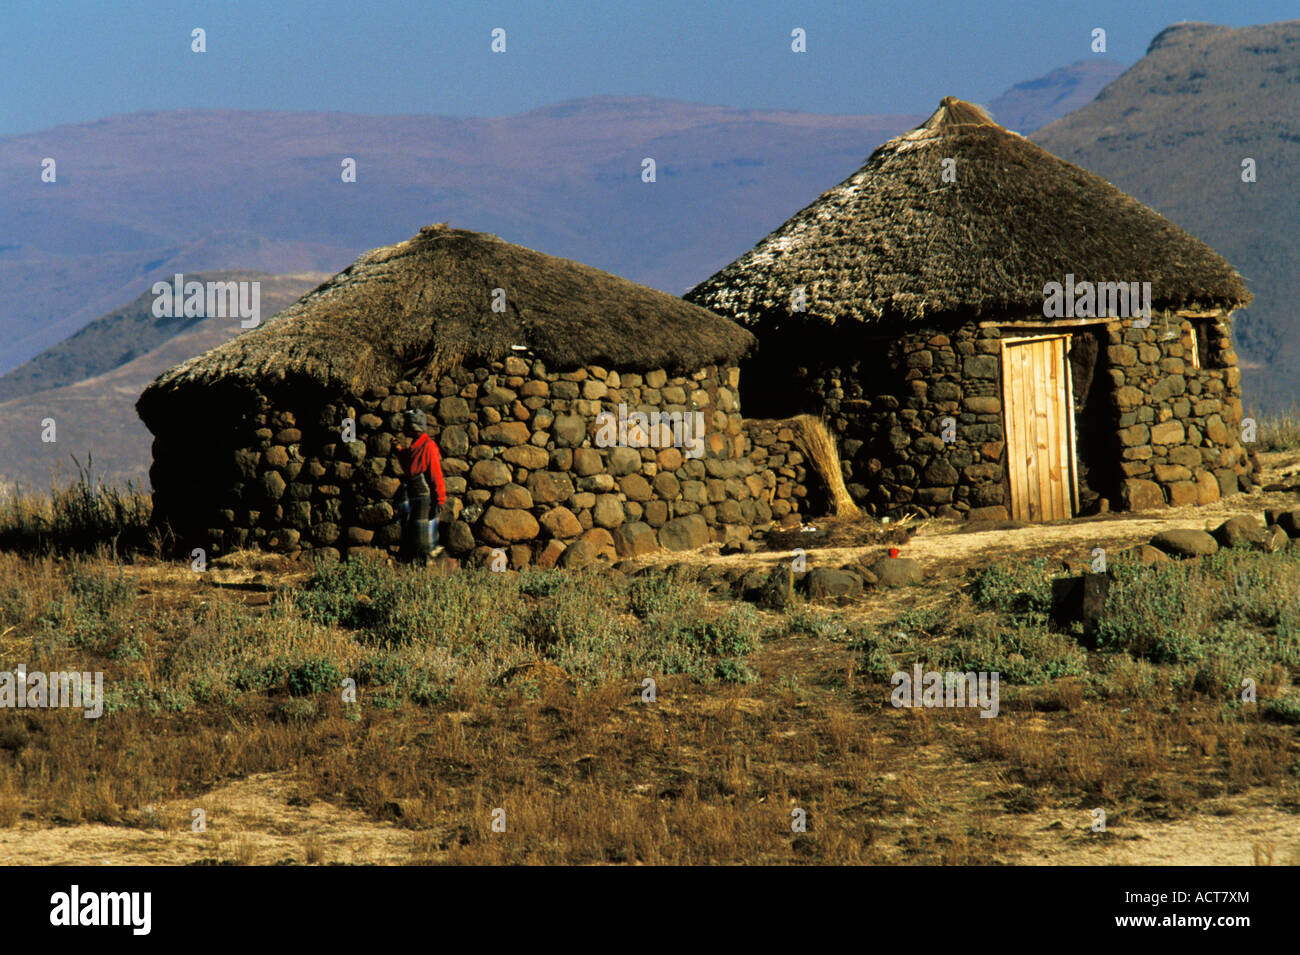 Traditional stone and thatch homesteads built on the escarpment in the Lesotho hills Lesotho Stock Photo